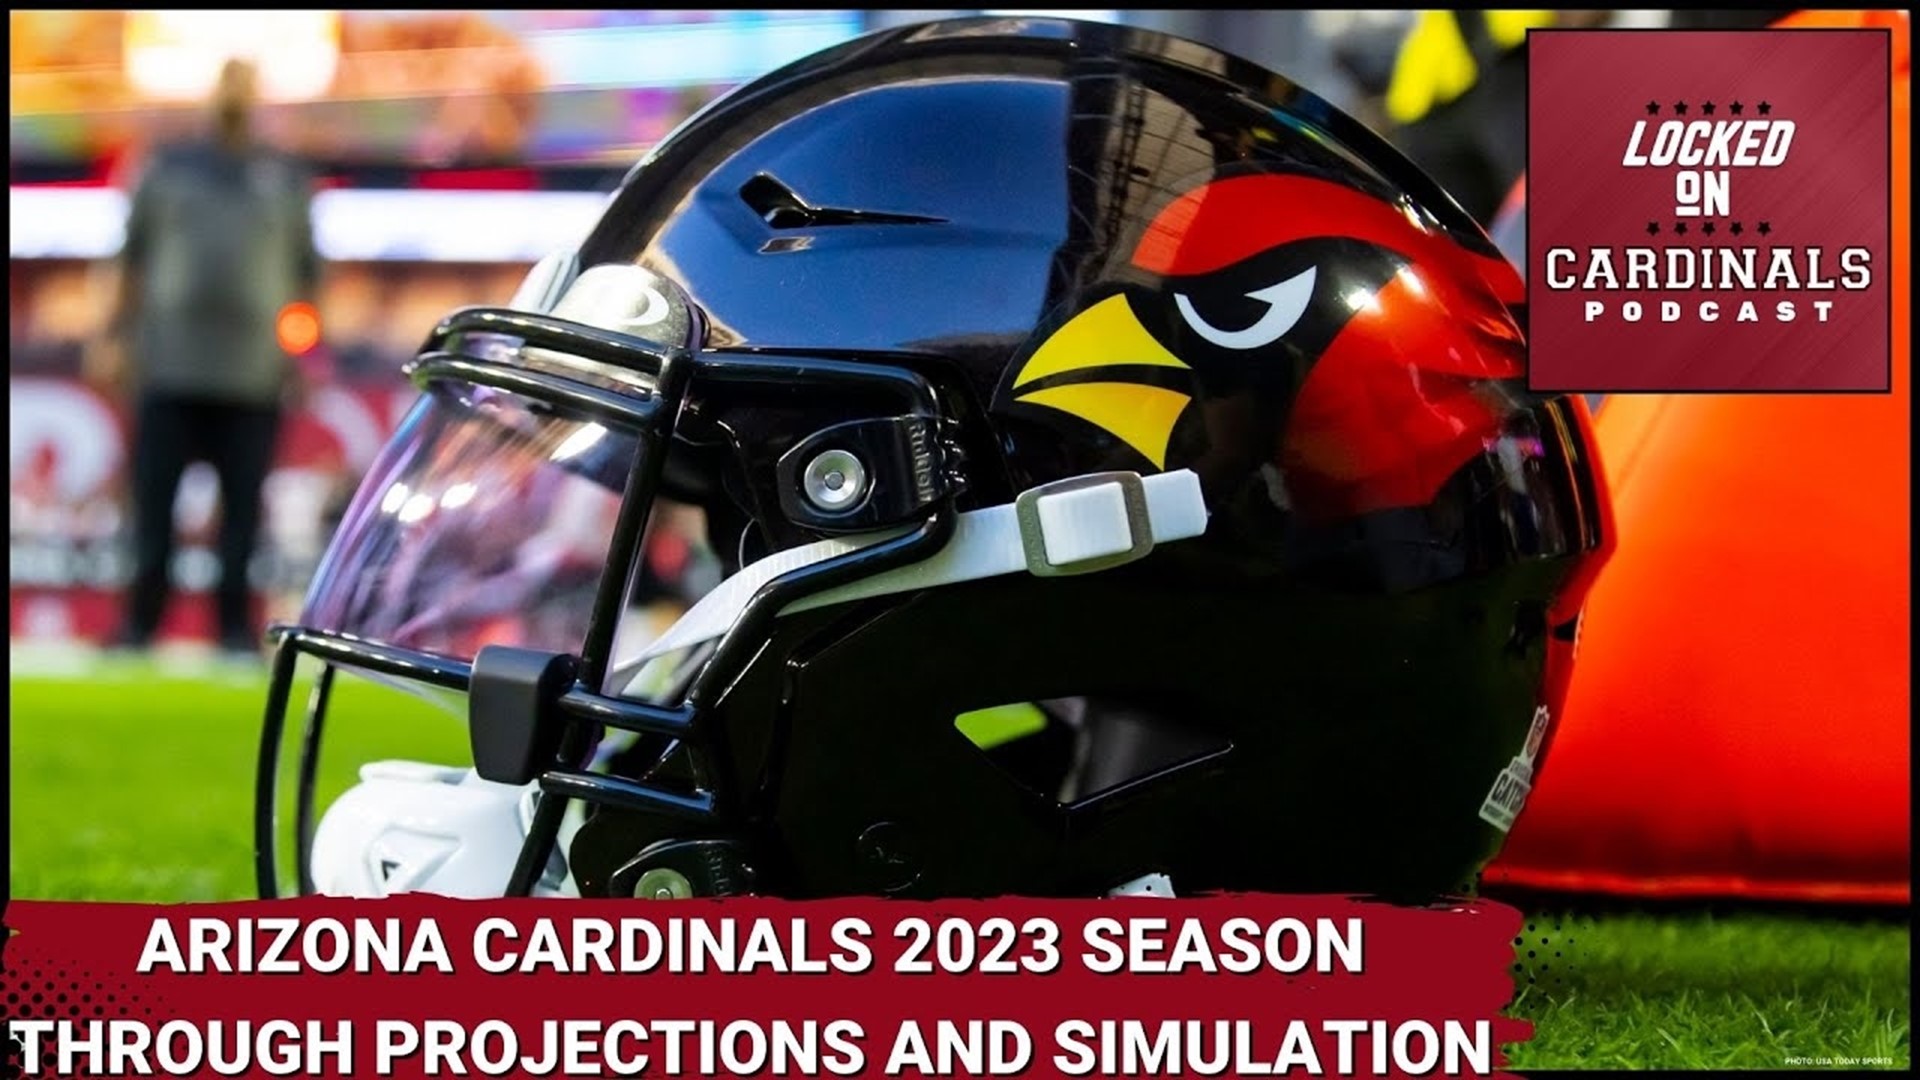 While the Arizona Cardinals 2023 season could be looked at as a lost season, the organization may be in a better position for the future.